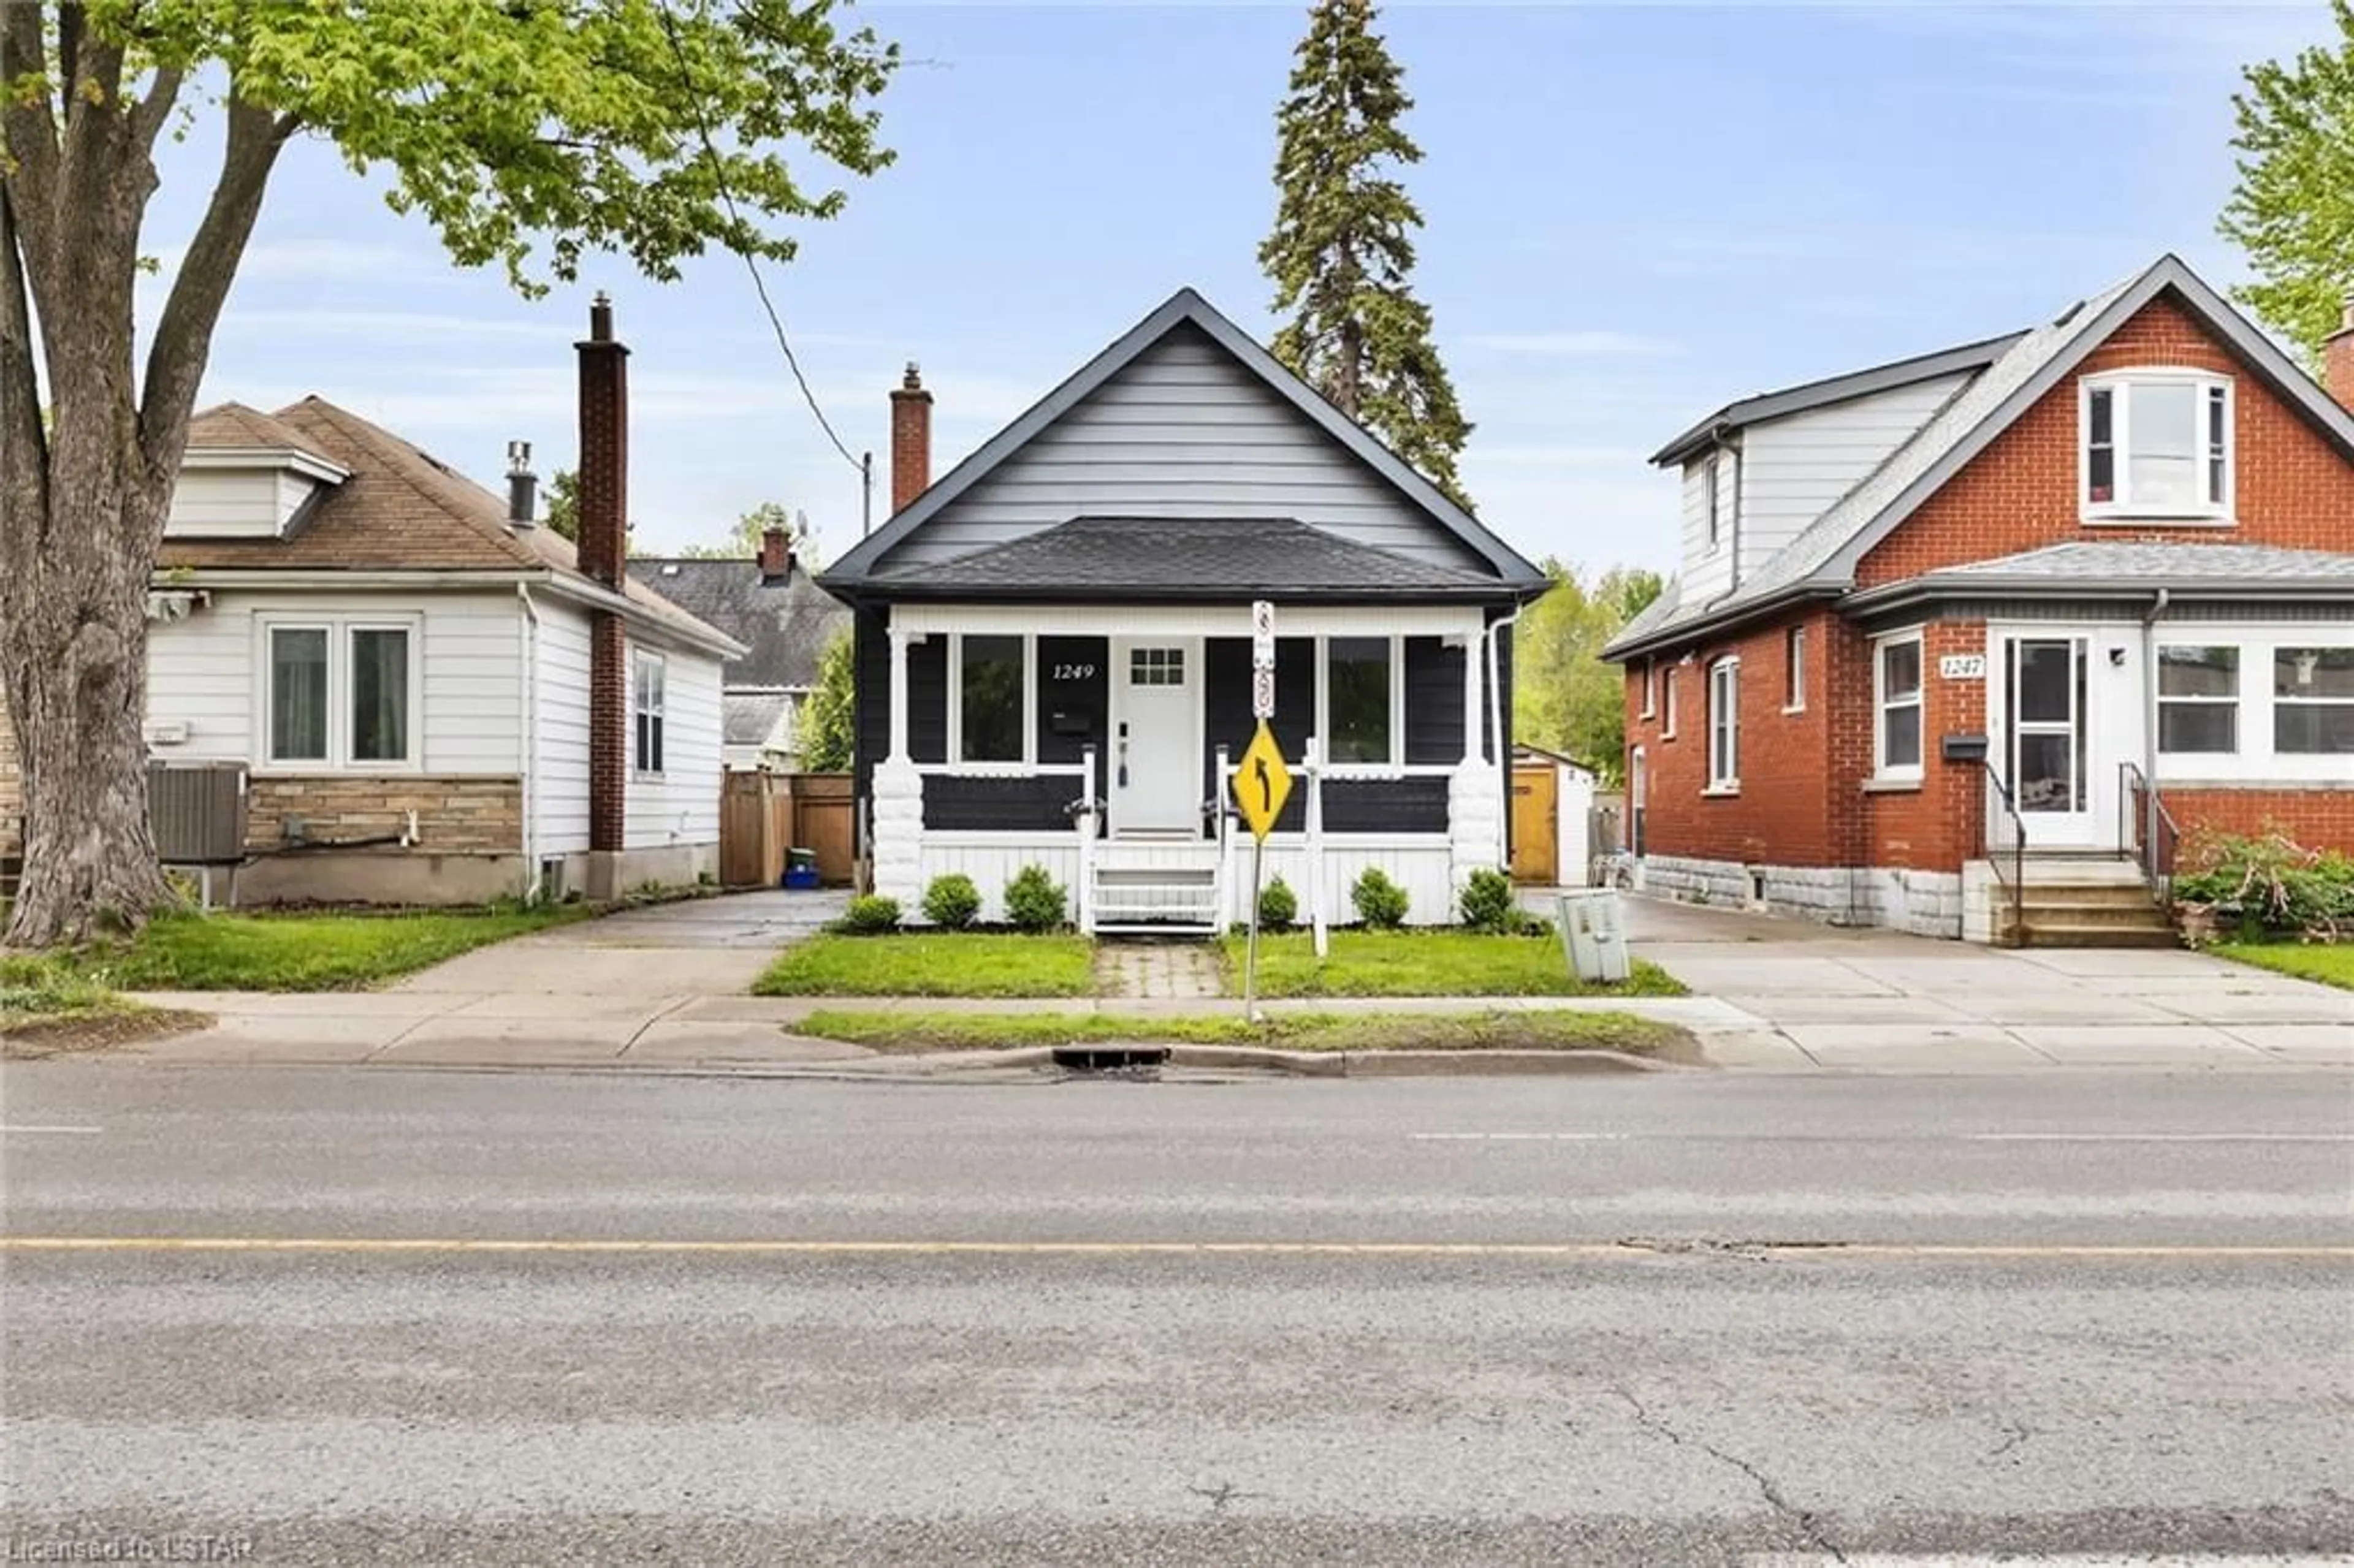 Frontside or backside of a home for 1249 Florence St, London Ontario N5W 2N3